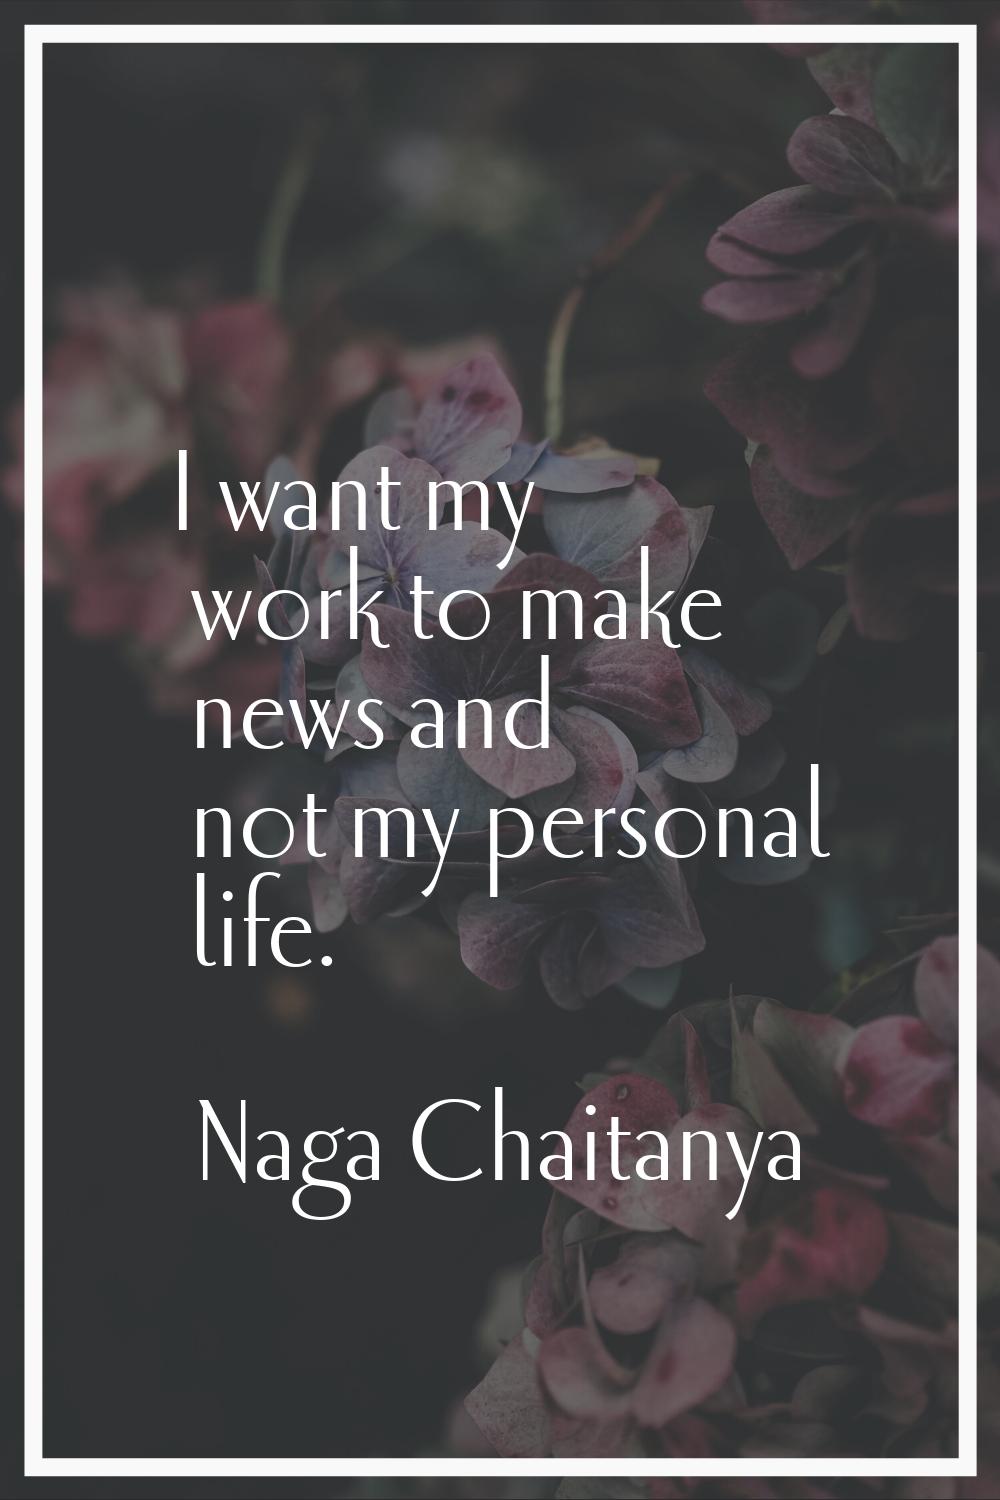 I want my work to make news and not my personal life.